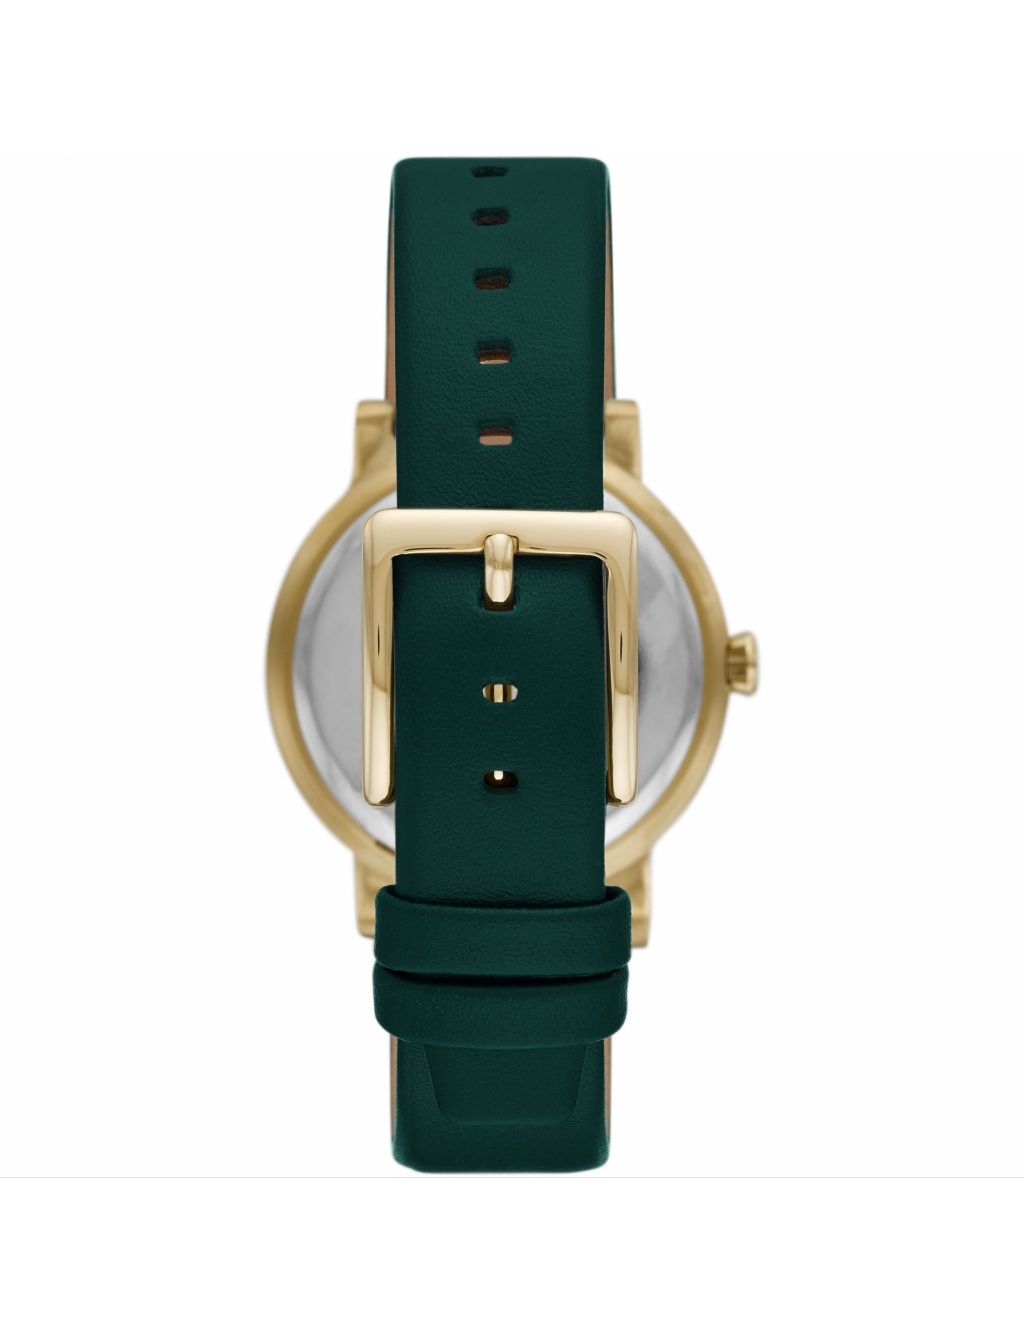 DKNY 7th Avenue Leather Watch image 2